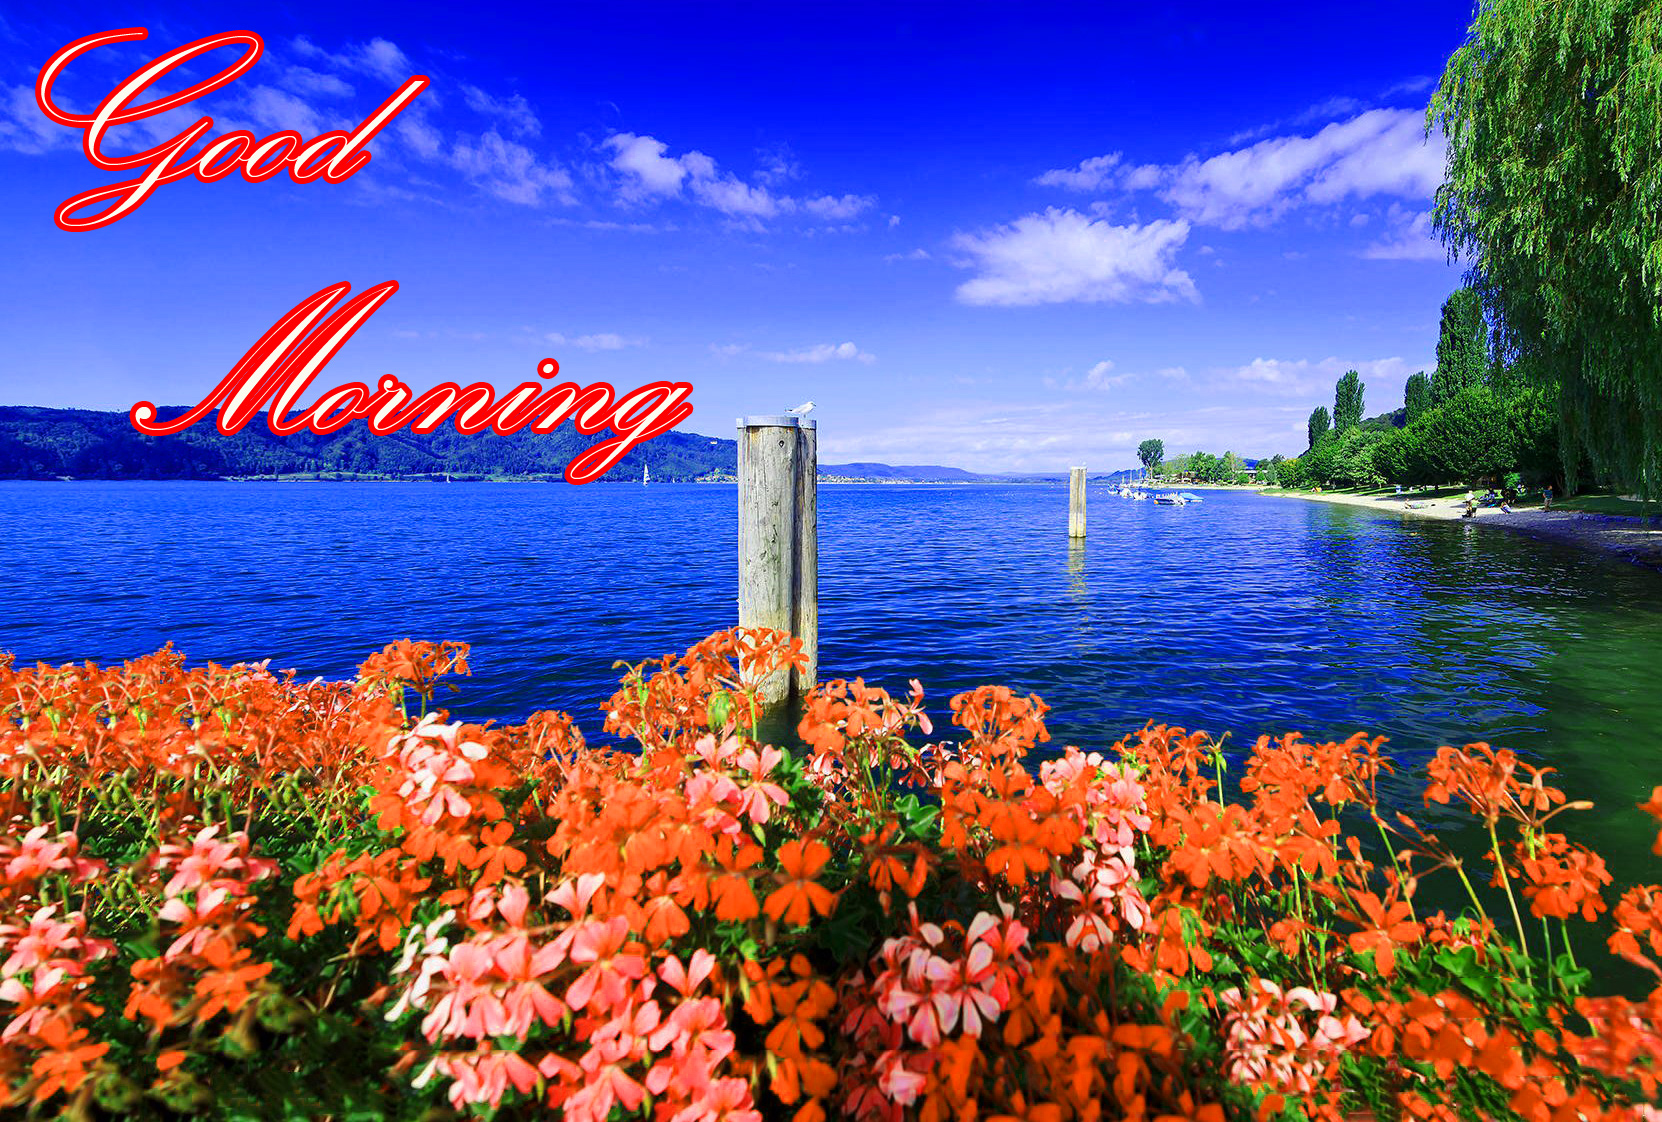 Latest Good Morning Images Wallpaper Photo Pics HD Download For